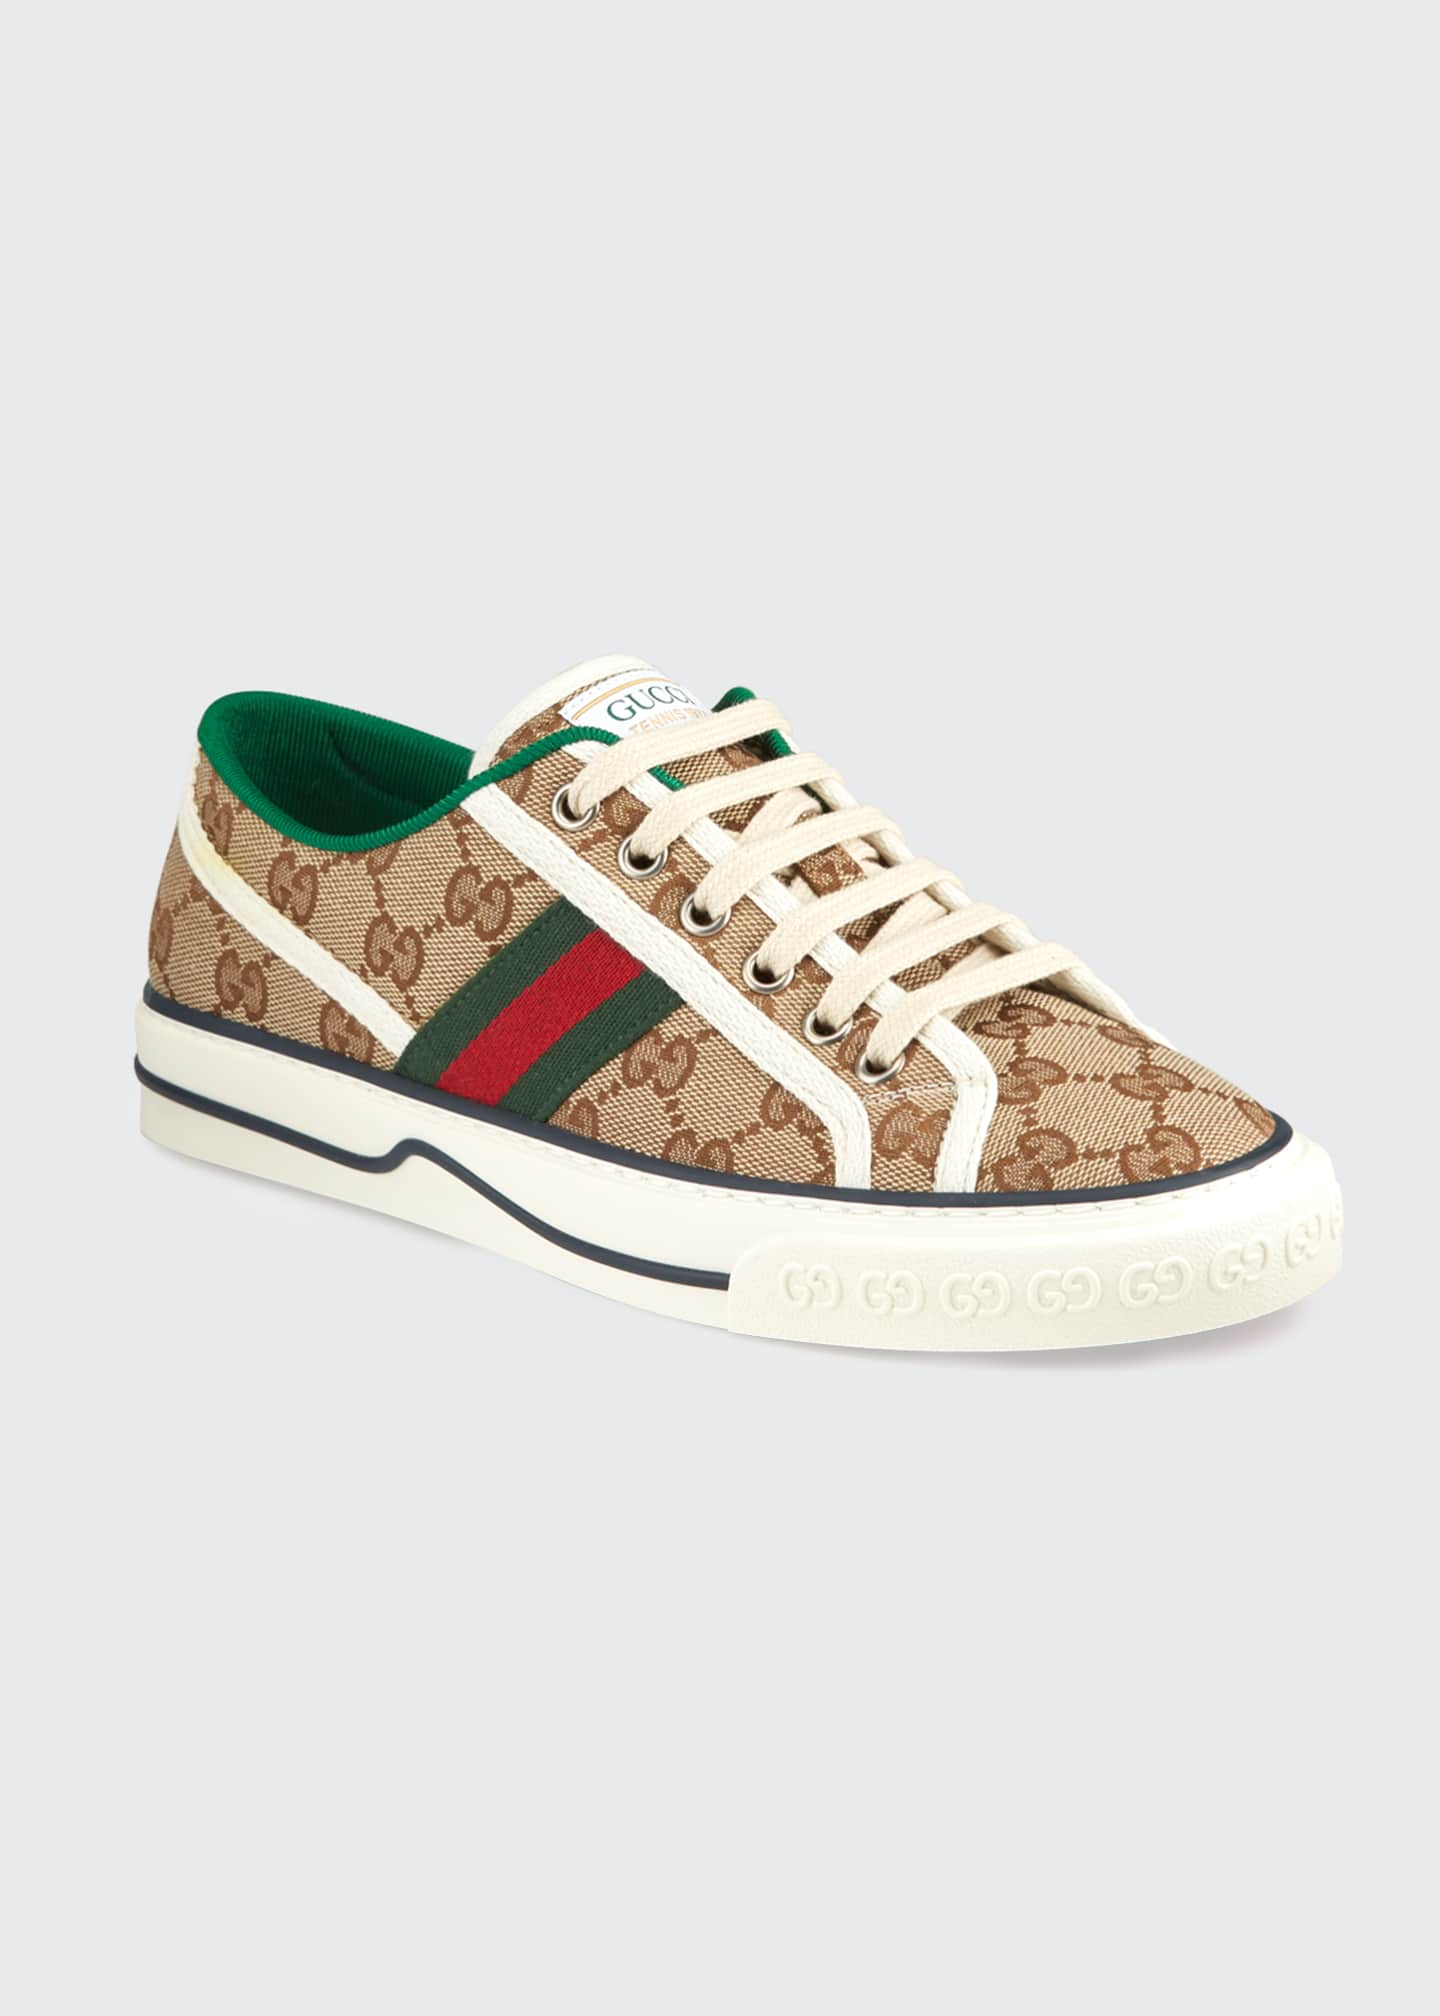 Gucci Gucci Tennis 1977 Sneakers Image 2 of 4